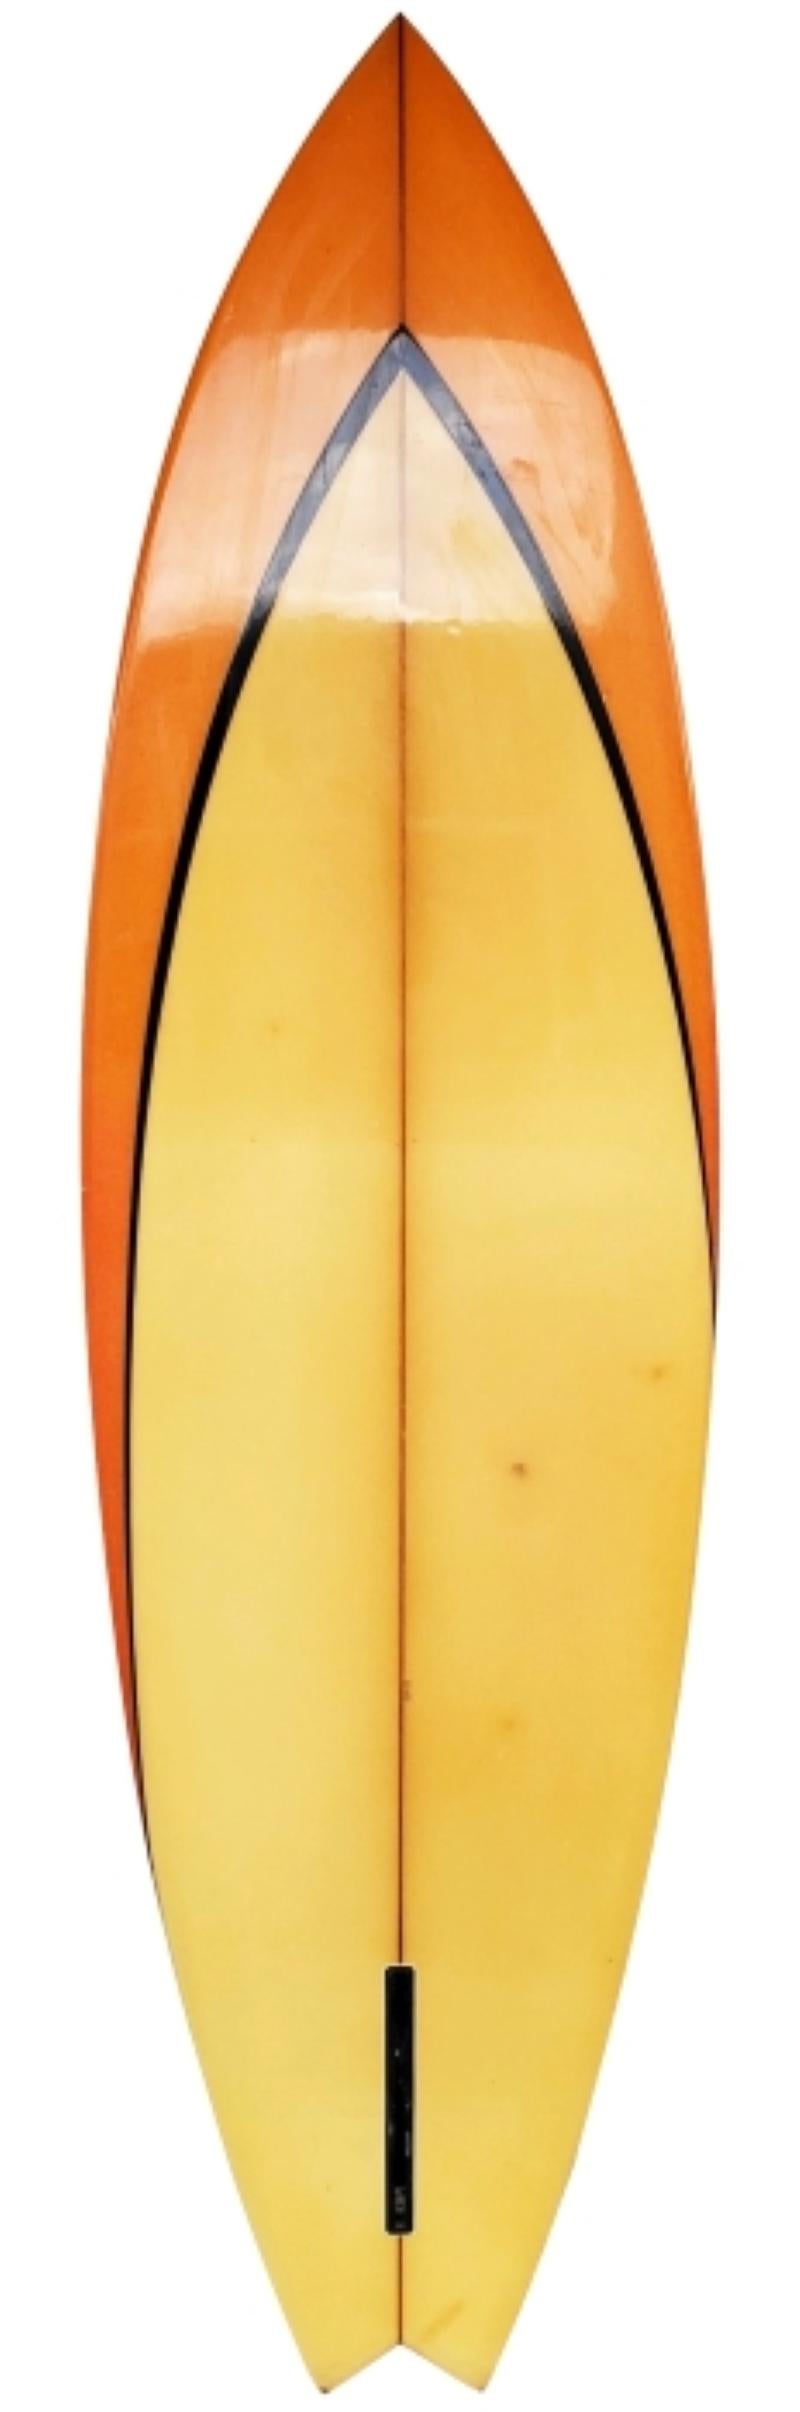 Vintage 1975 Hawaiian expressions single fin surfboard shaped by Larry Bertlemann. Features an orange airbrush design with black pinstriping and original red and yellow box single fin. Uncommon misspelling of Bertlemann's last name with only one 